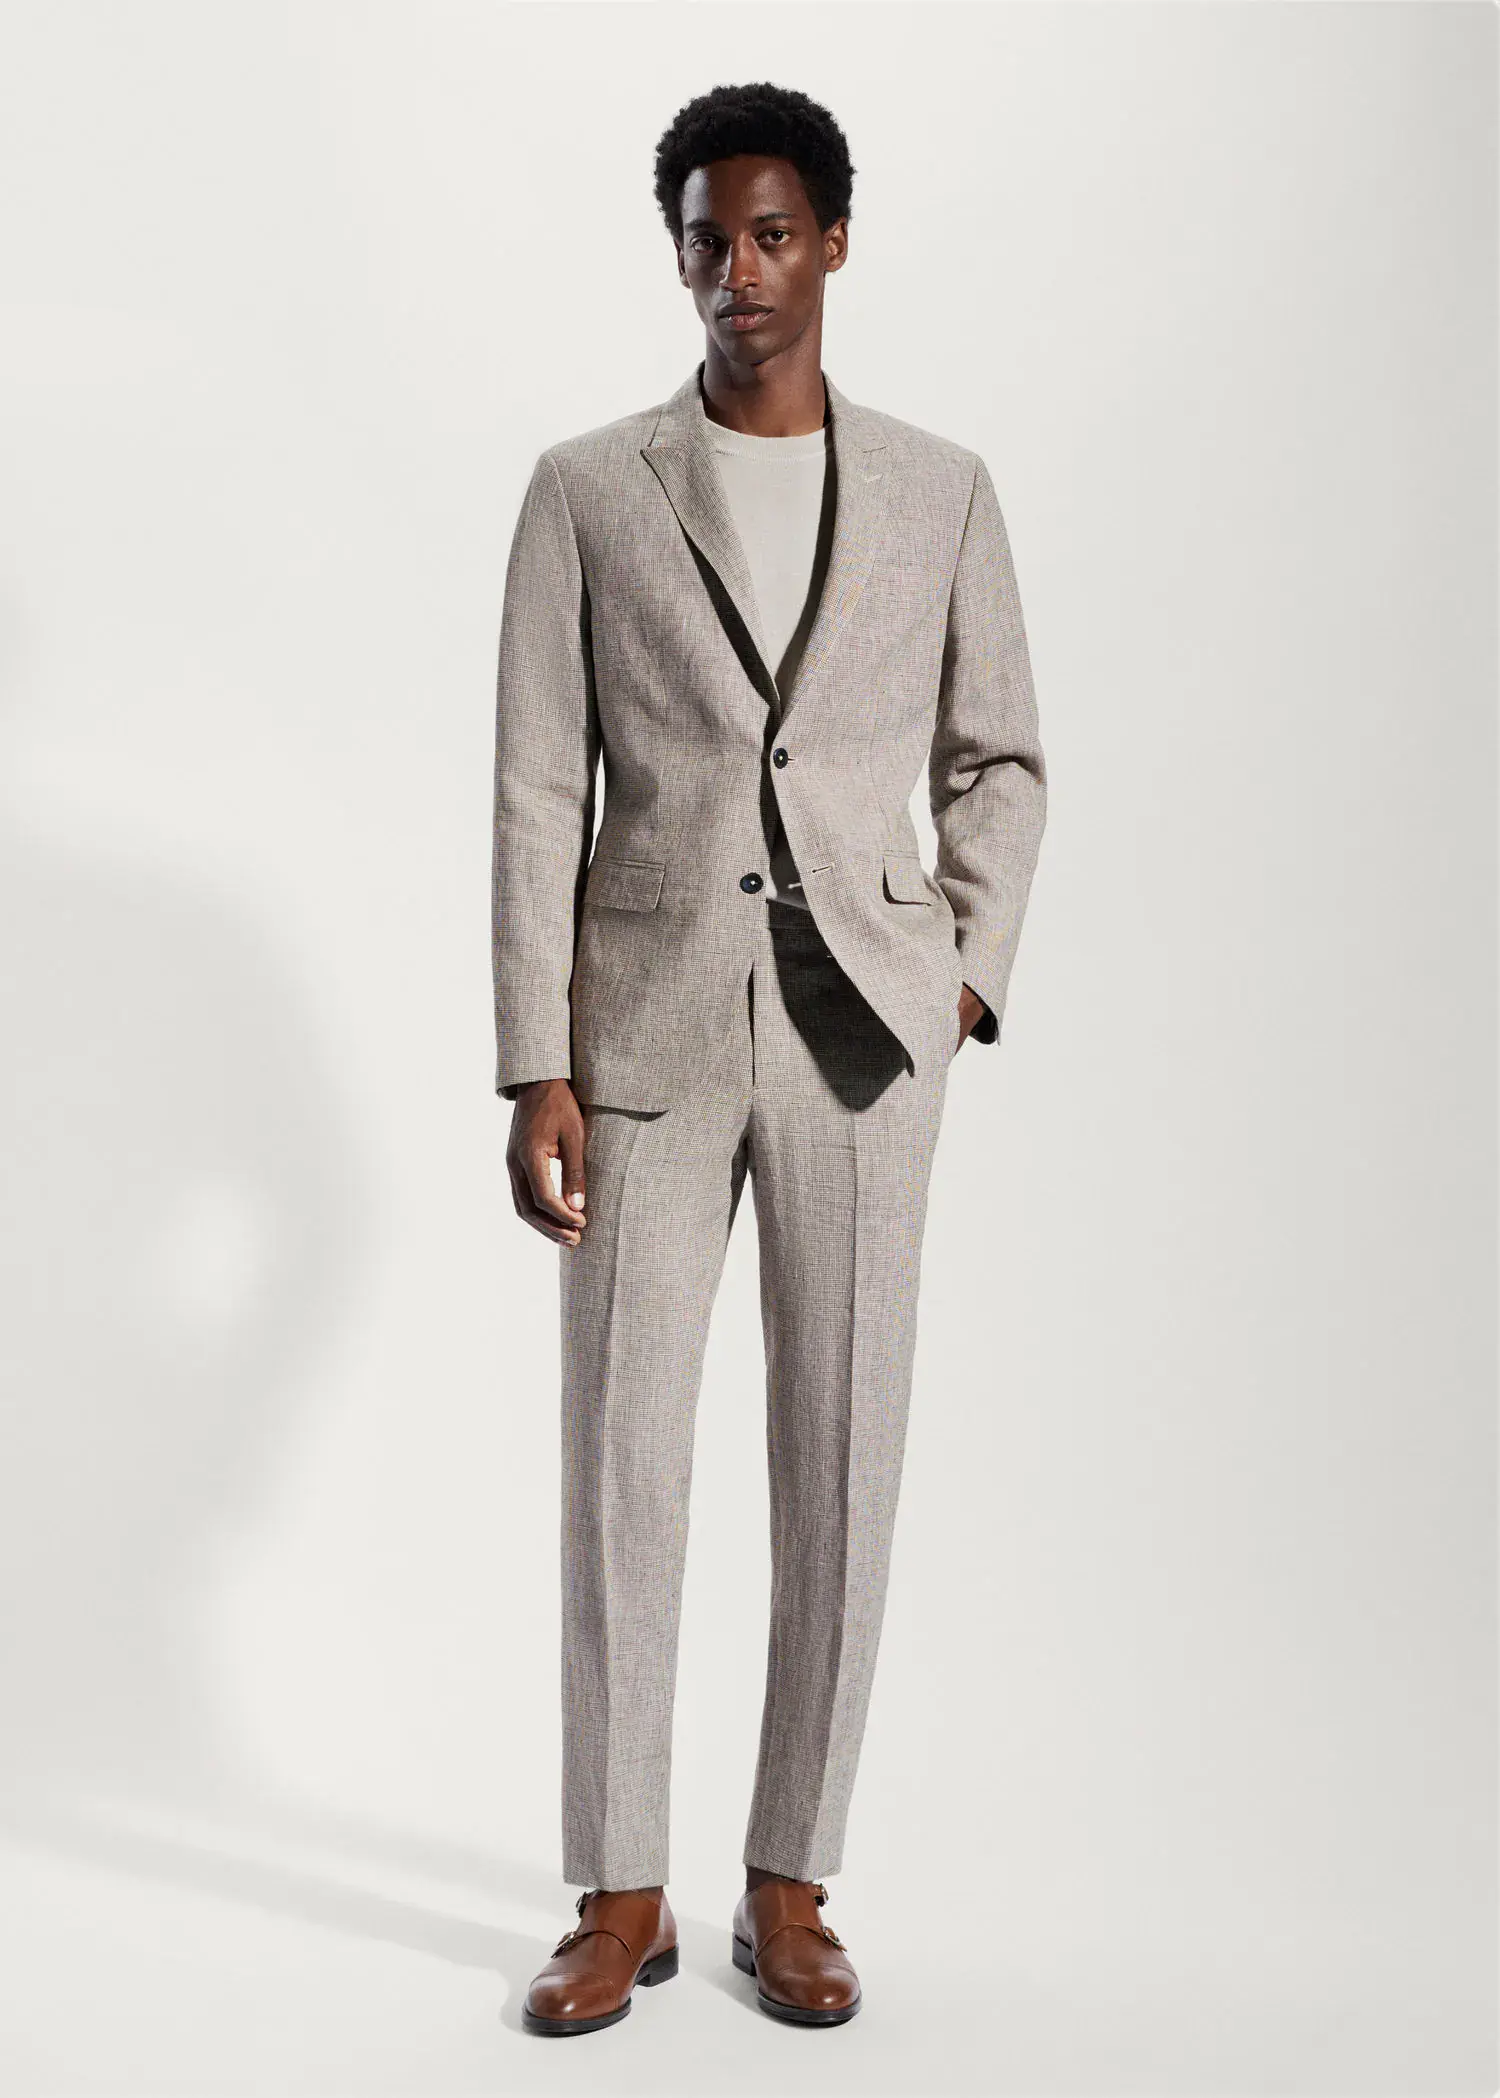 Mango 100% linen suit blazer. a man in a suit standing in front of a white wall. 